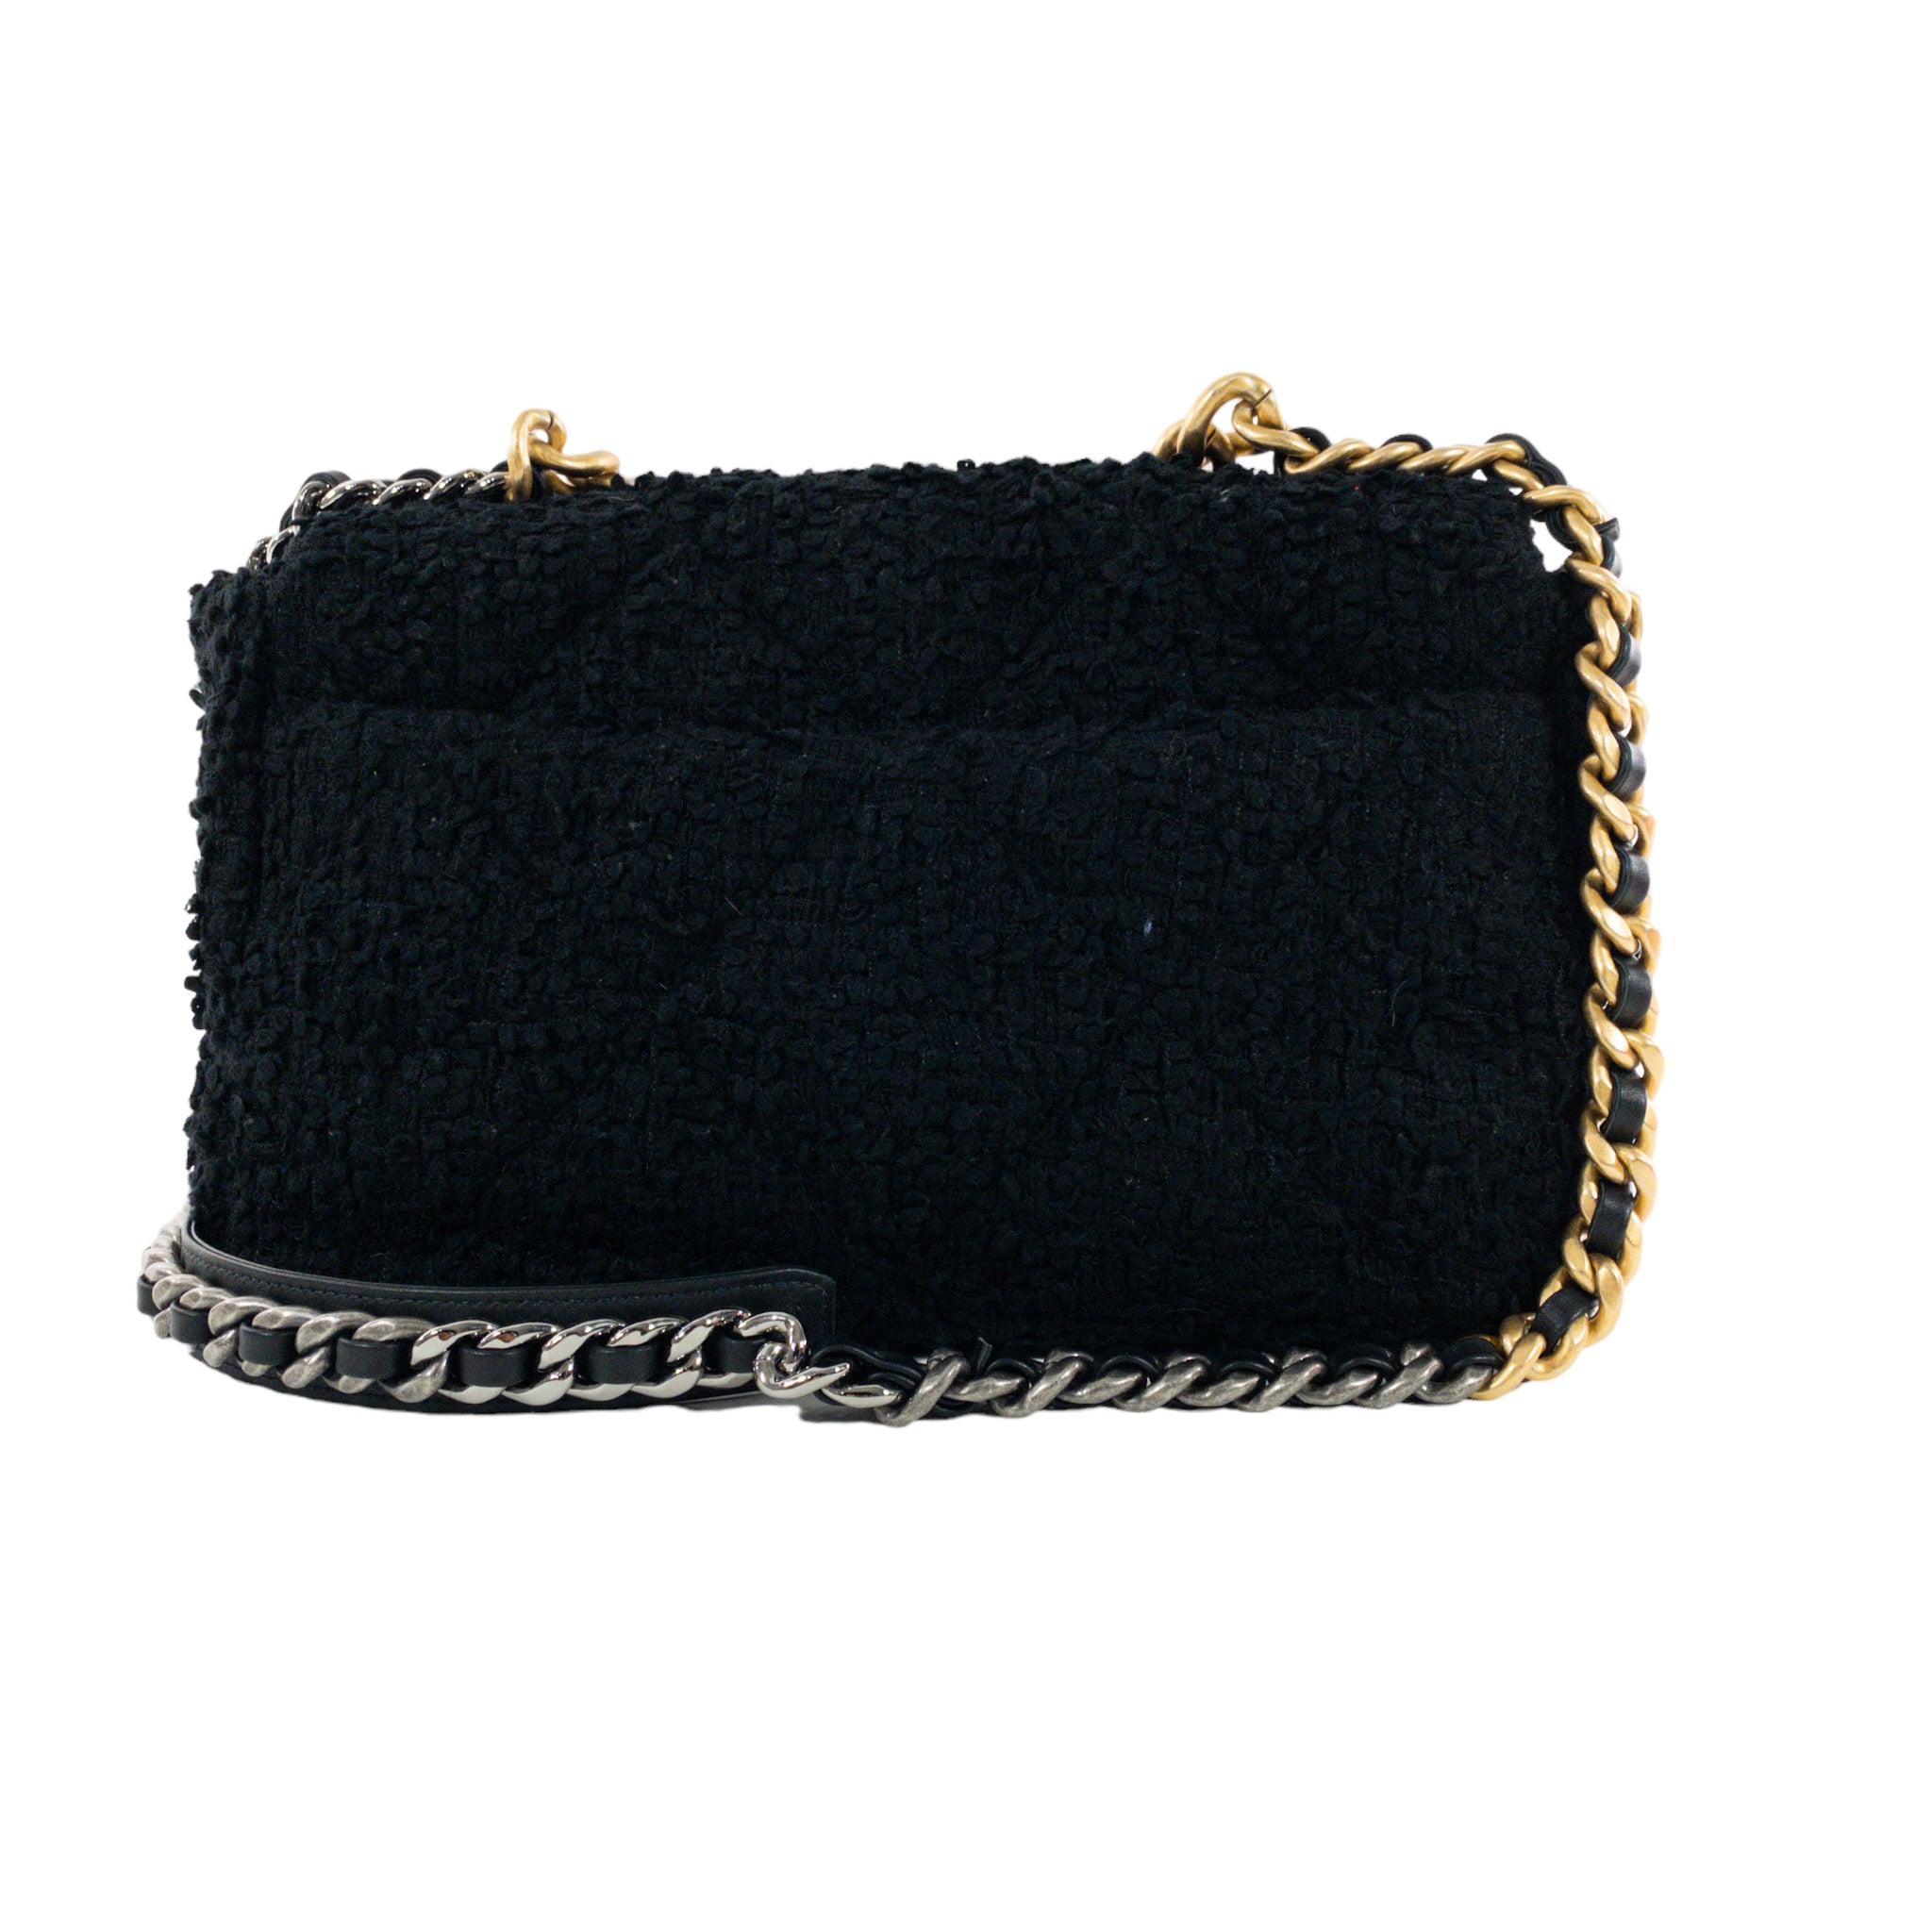 Chanel Black Tweed Large 

This is an authentic Chanel large 19. Black tweed exterior with large quilting and front flap. Woven leather chain CC turn clasp. Large spacious pocket in back with chain top handle and long chain shoulder strap. Interior